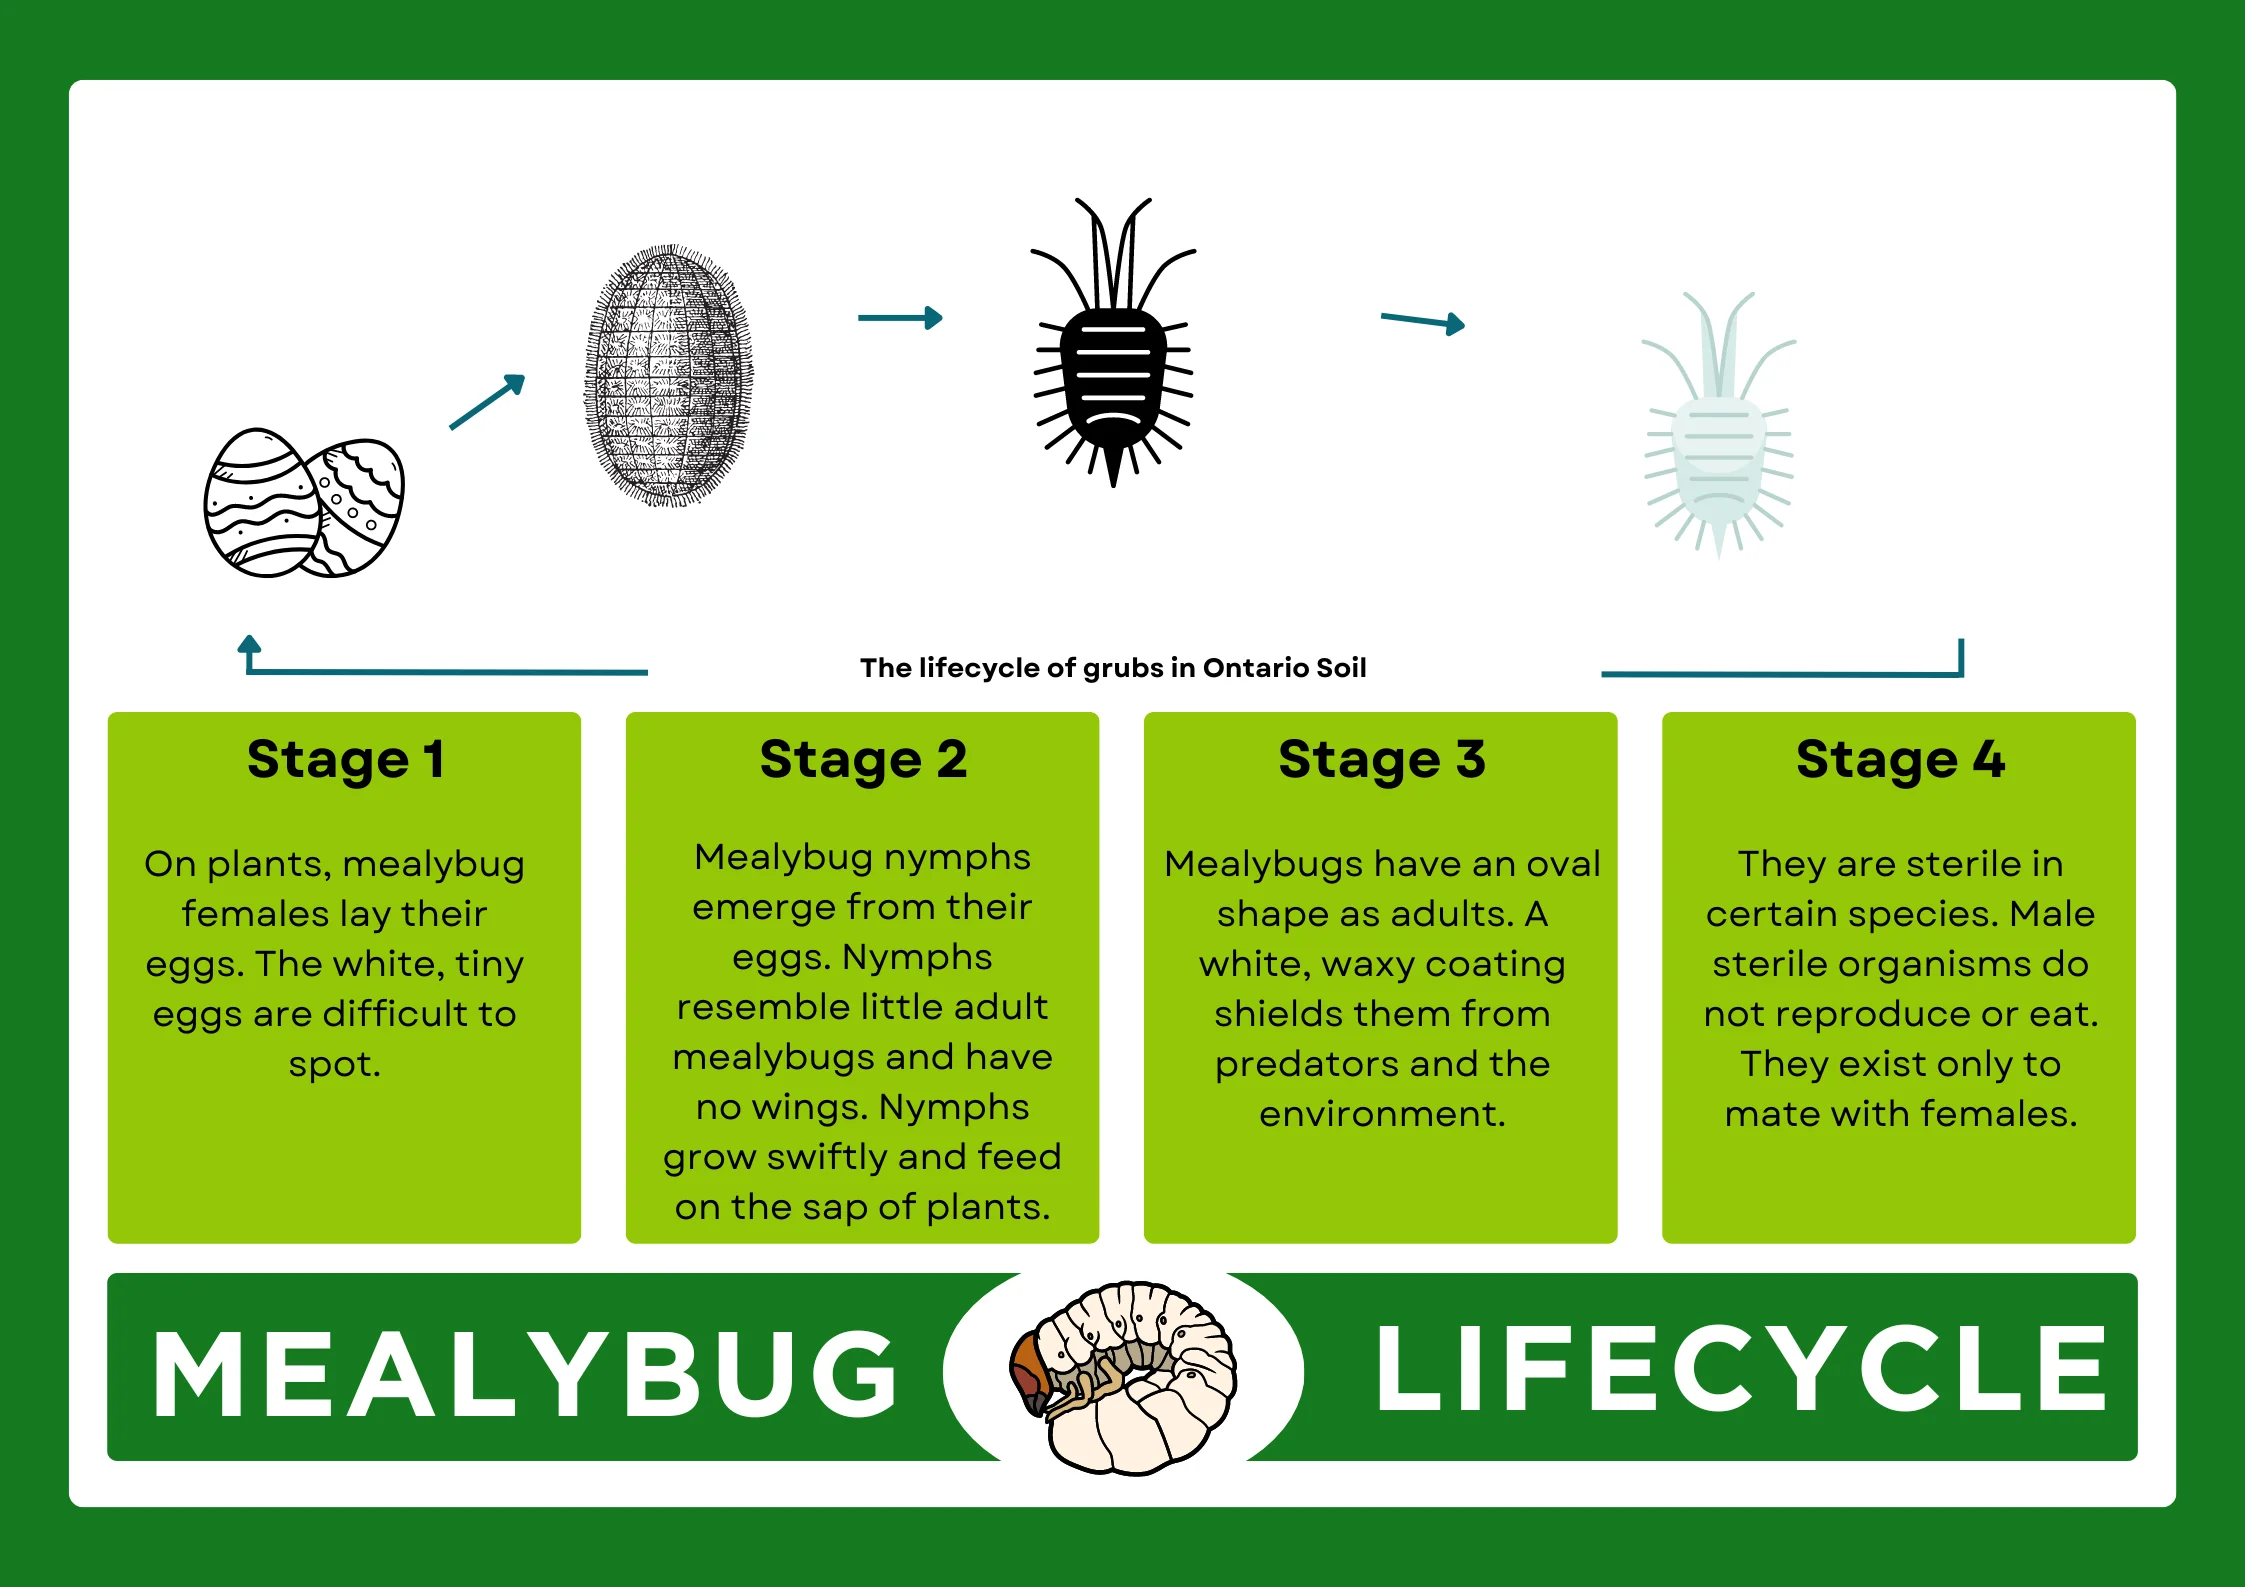 An infographic on mealybugs lifecycle